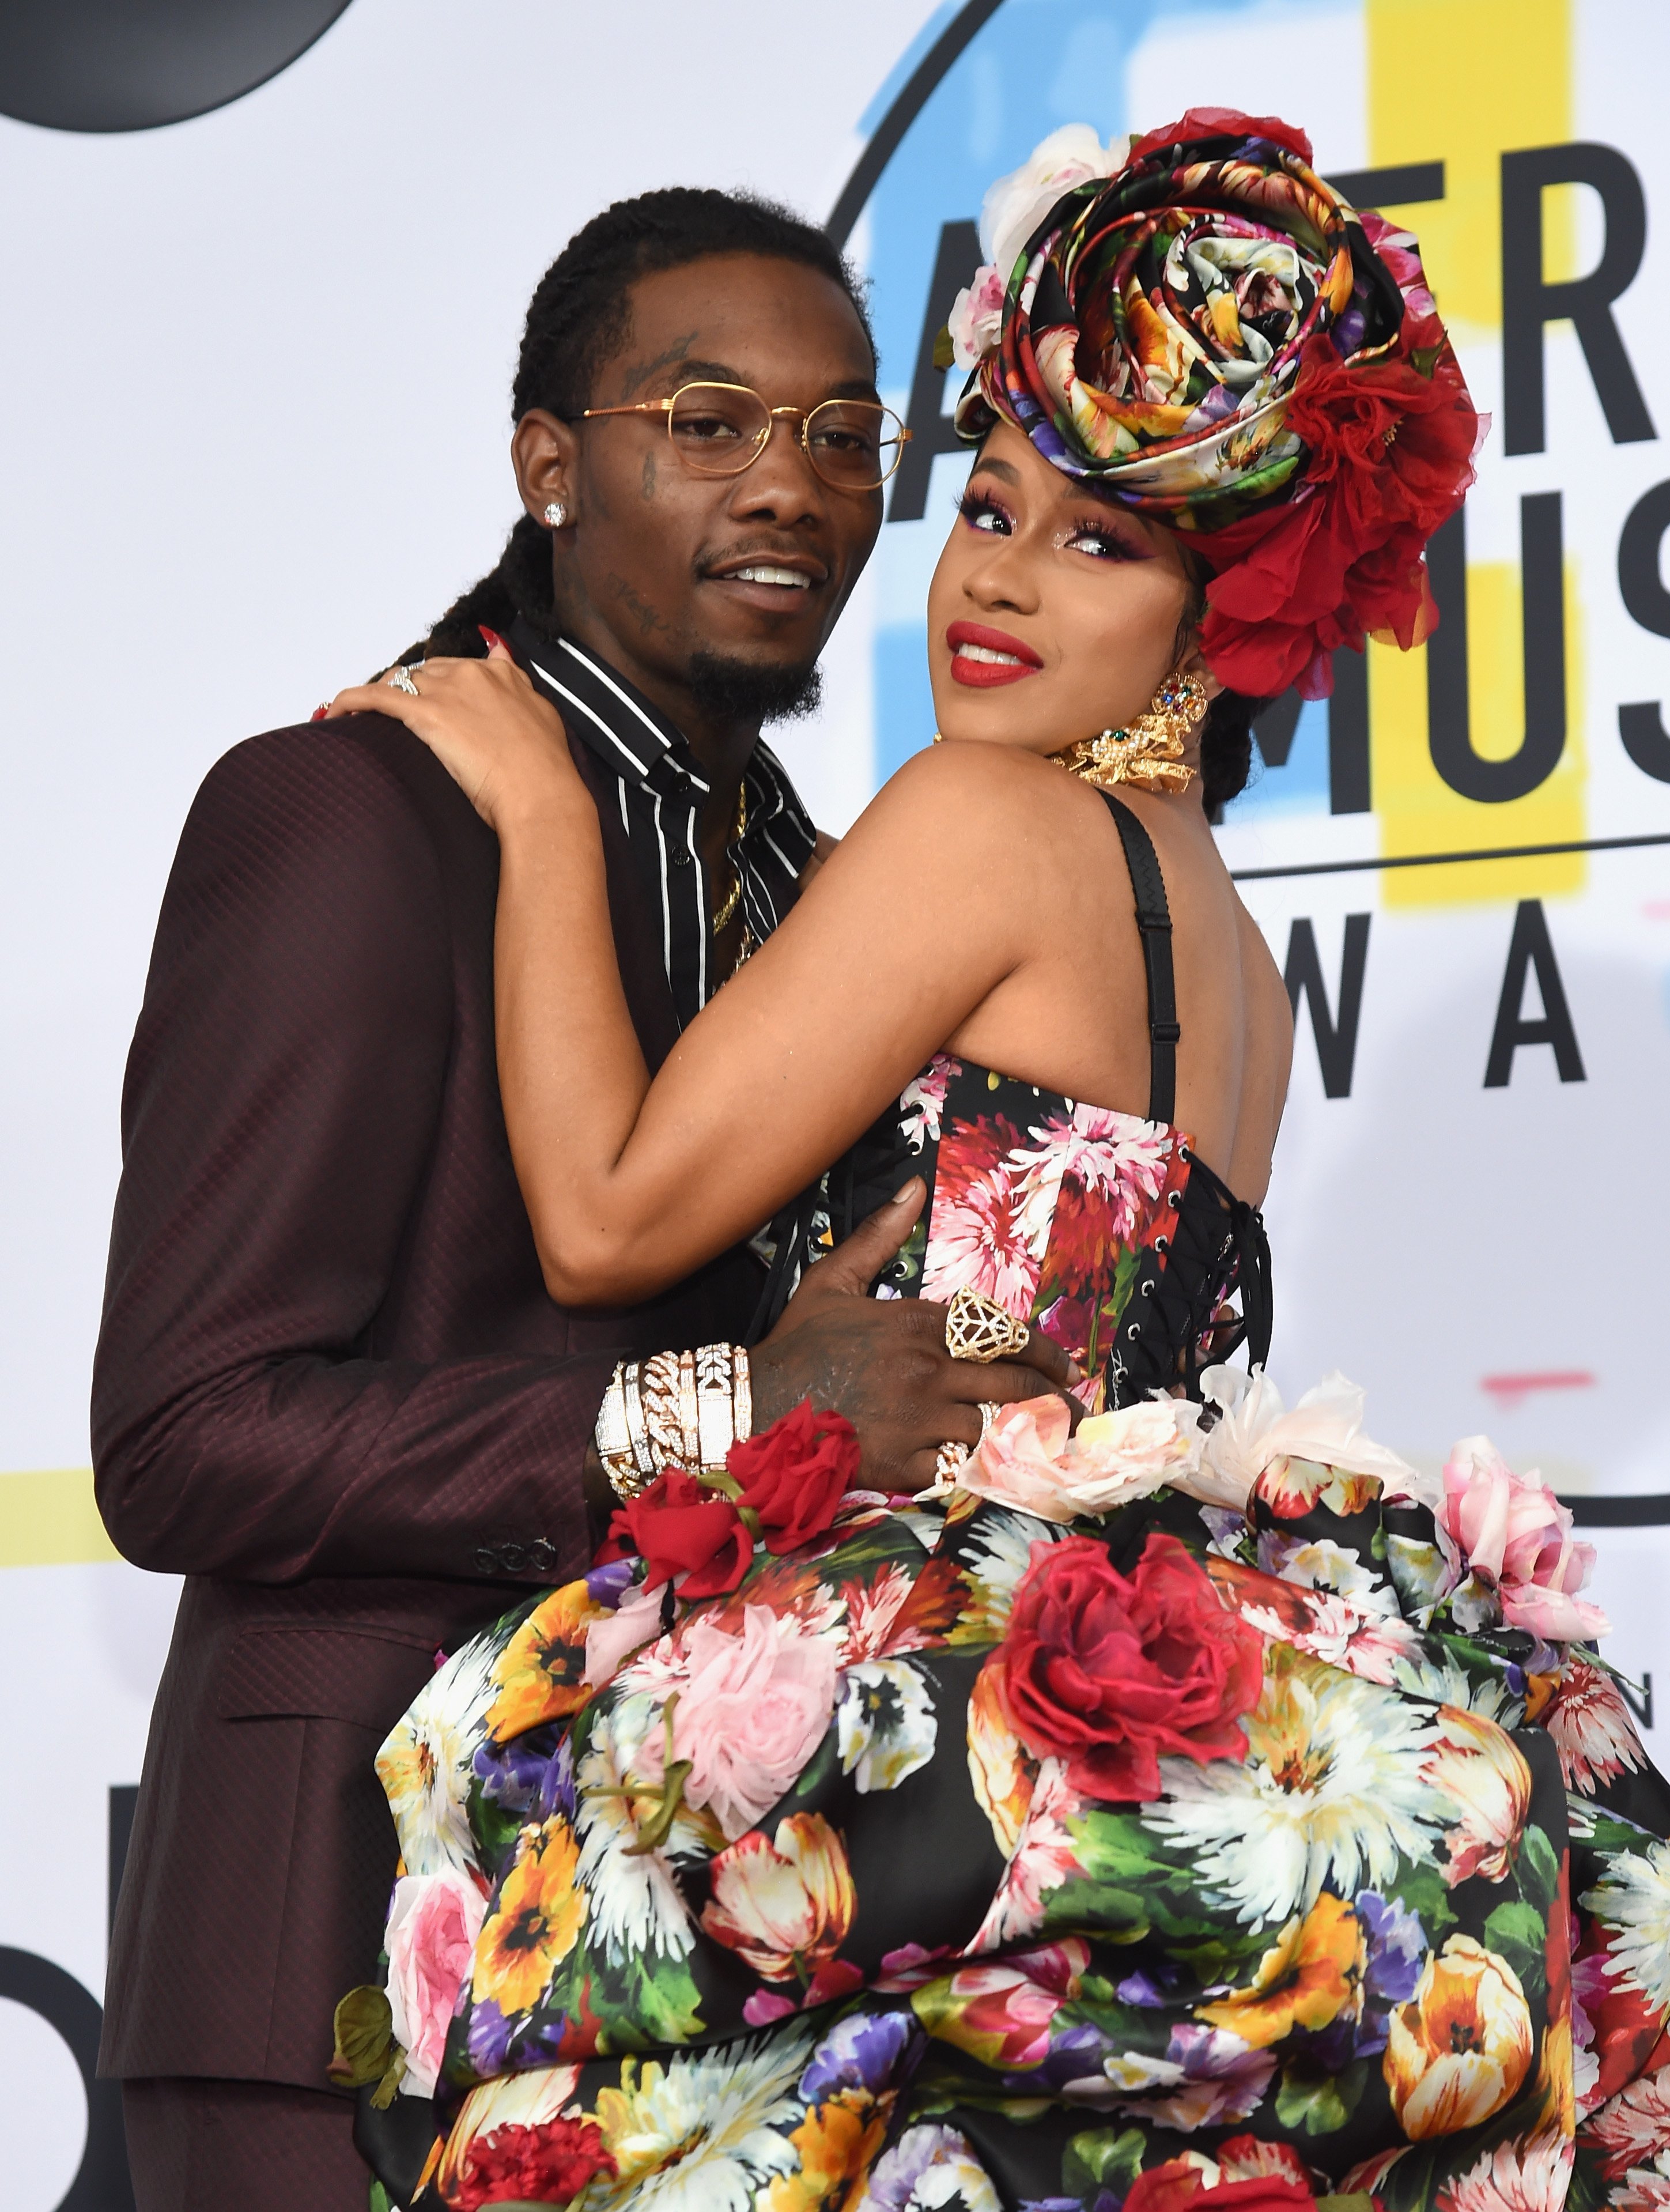 Offset of Migos and Cardi B attend the 2018 American Music Awards at Microsoft Theater. | Source: Getty Images